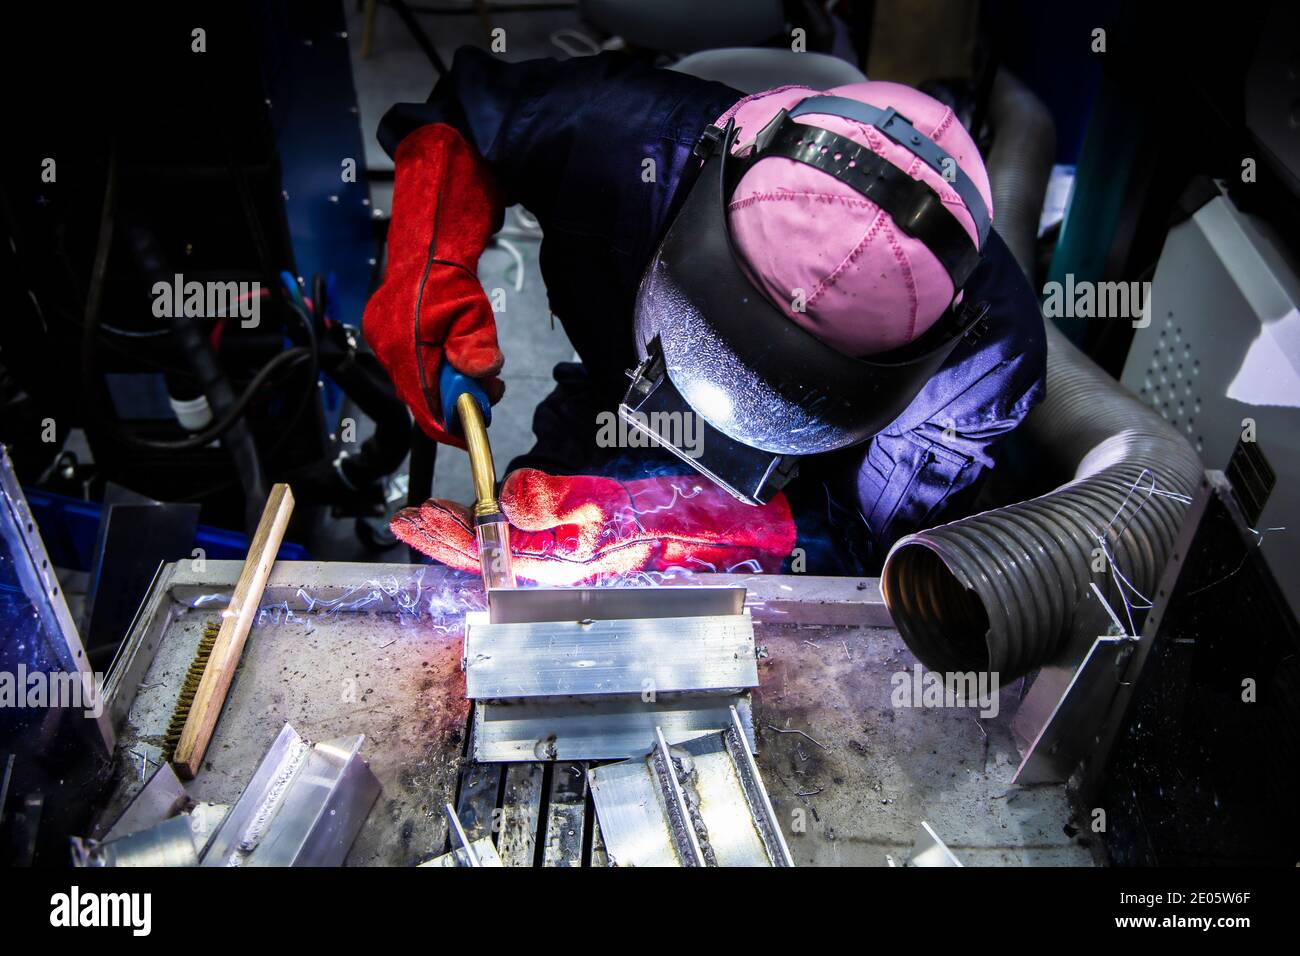 Welding steel with spread spark and lighting around. Stock Photo